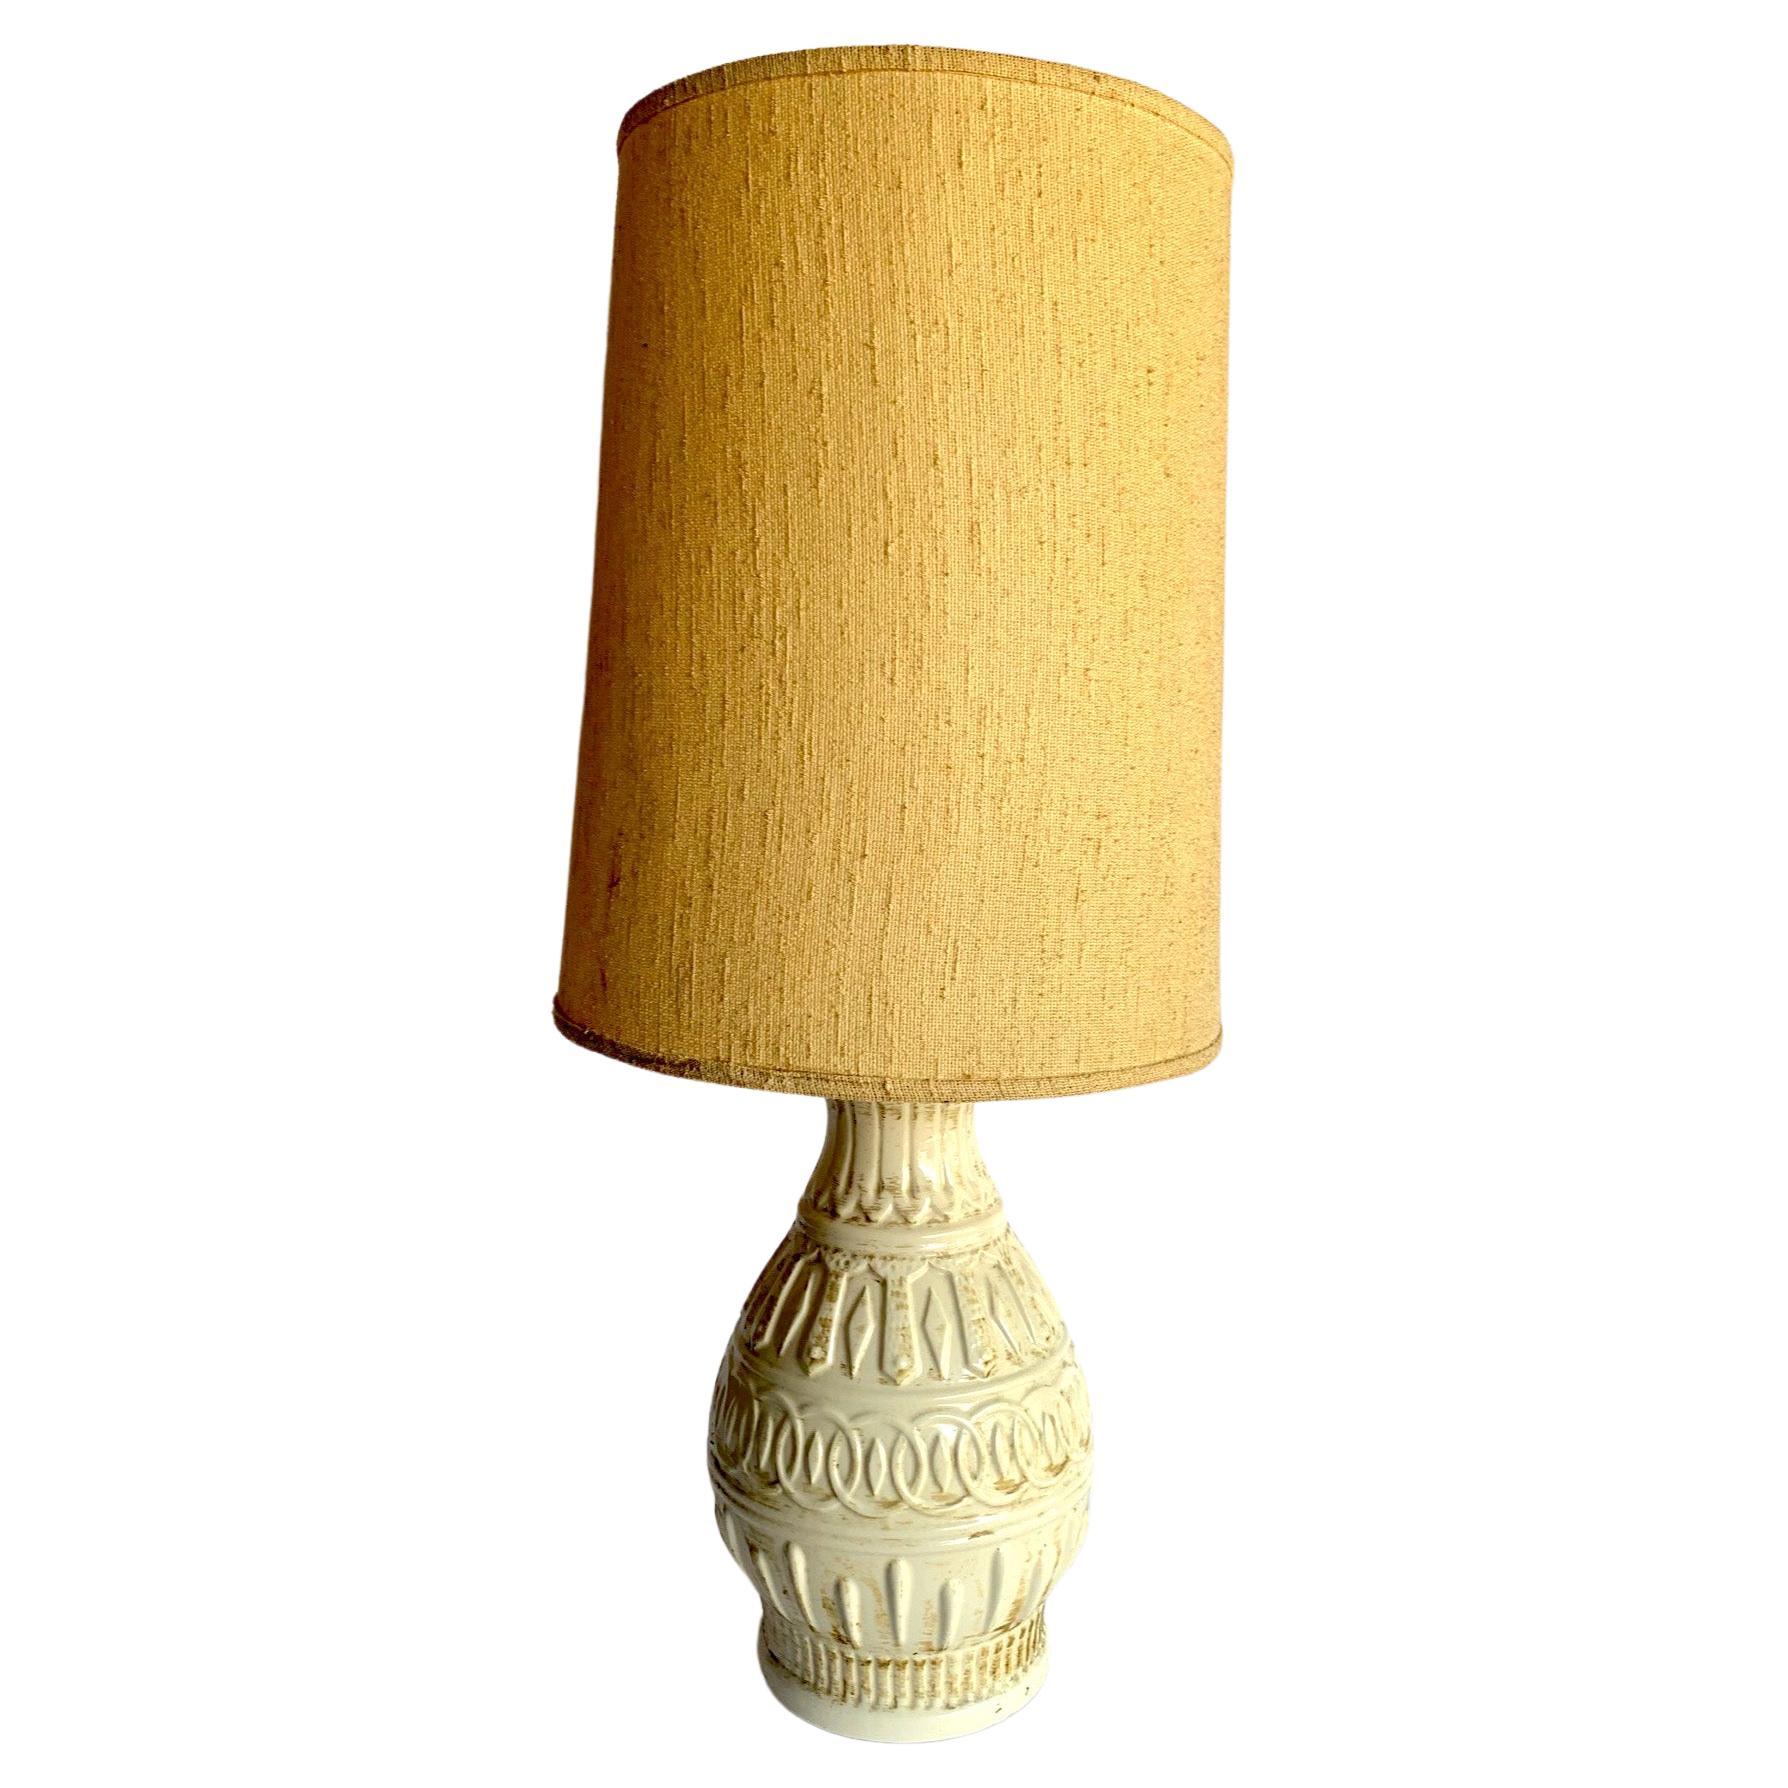 Cream Ceramic Midcentury Table Lamp, 1960s, Chainlink Pattern in Relief For Sale